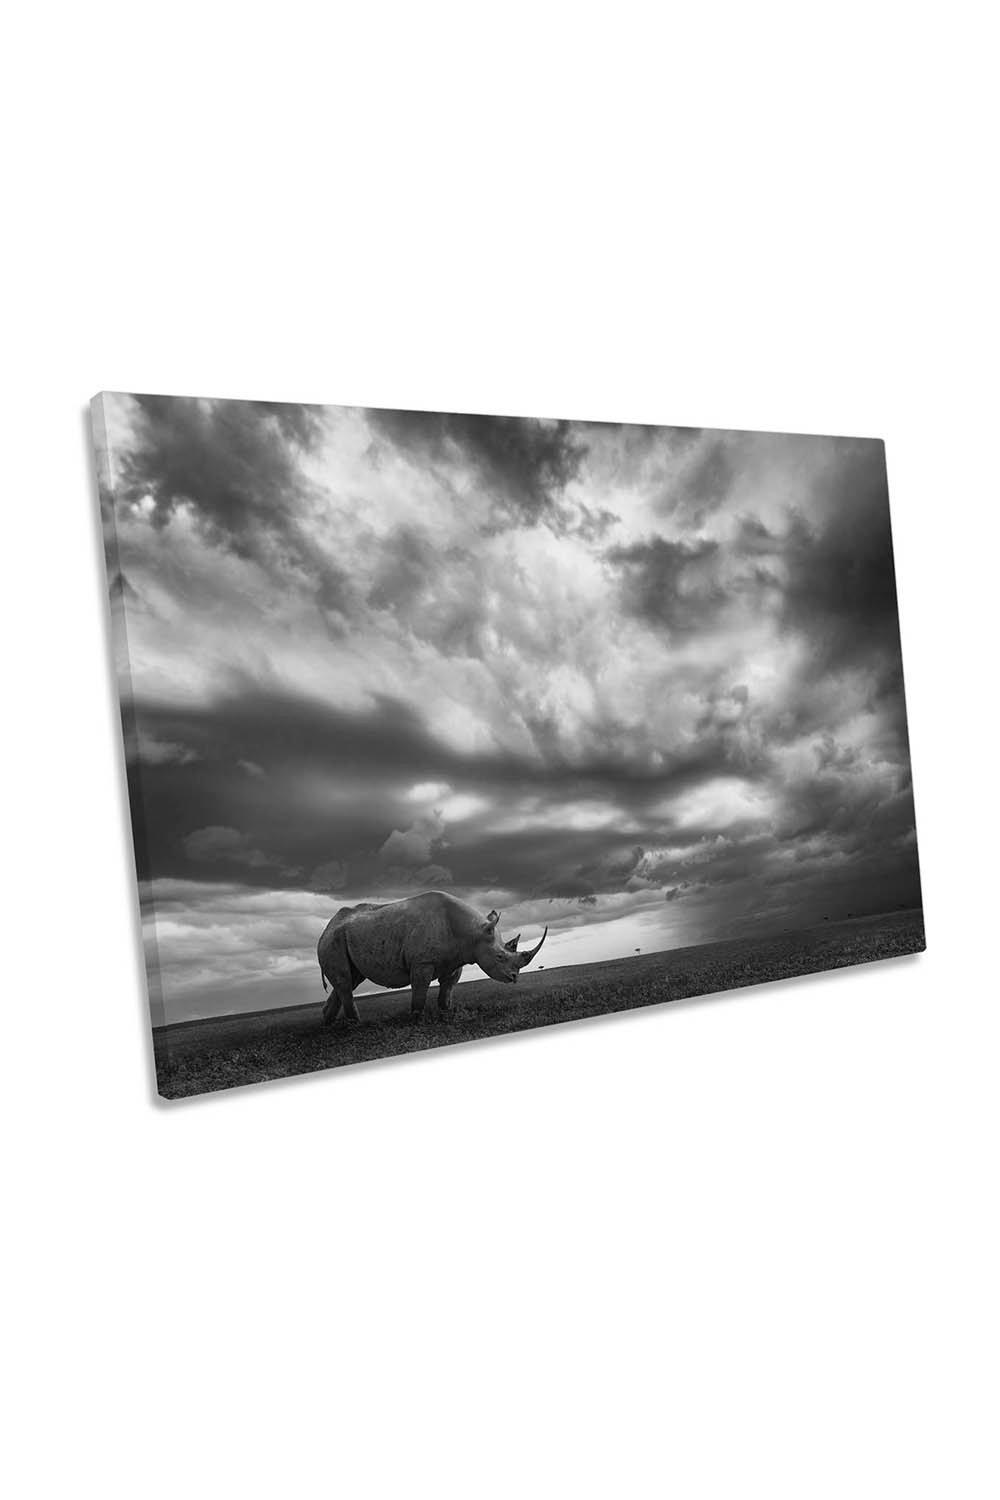 Rhino Wildlife Black and White Clouds Canvas Wall Art Picture Print